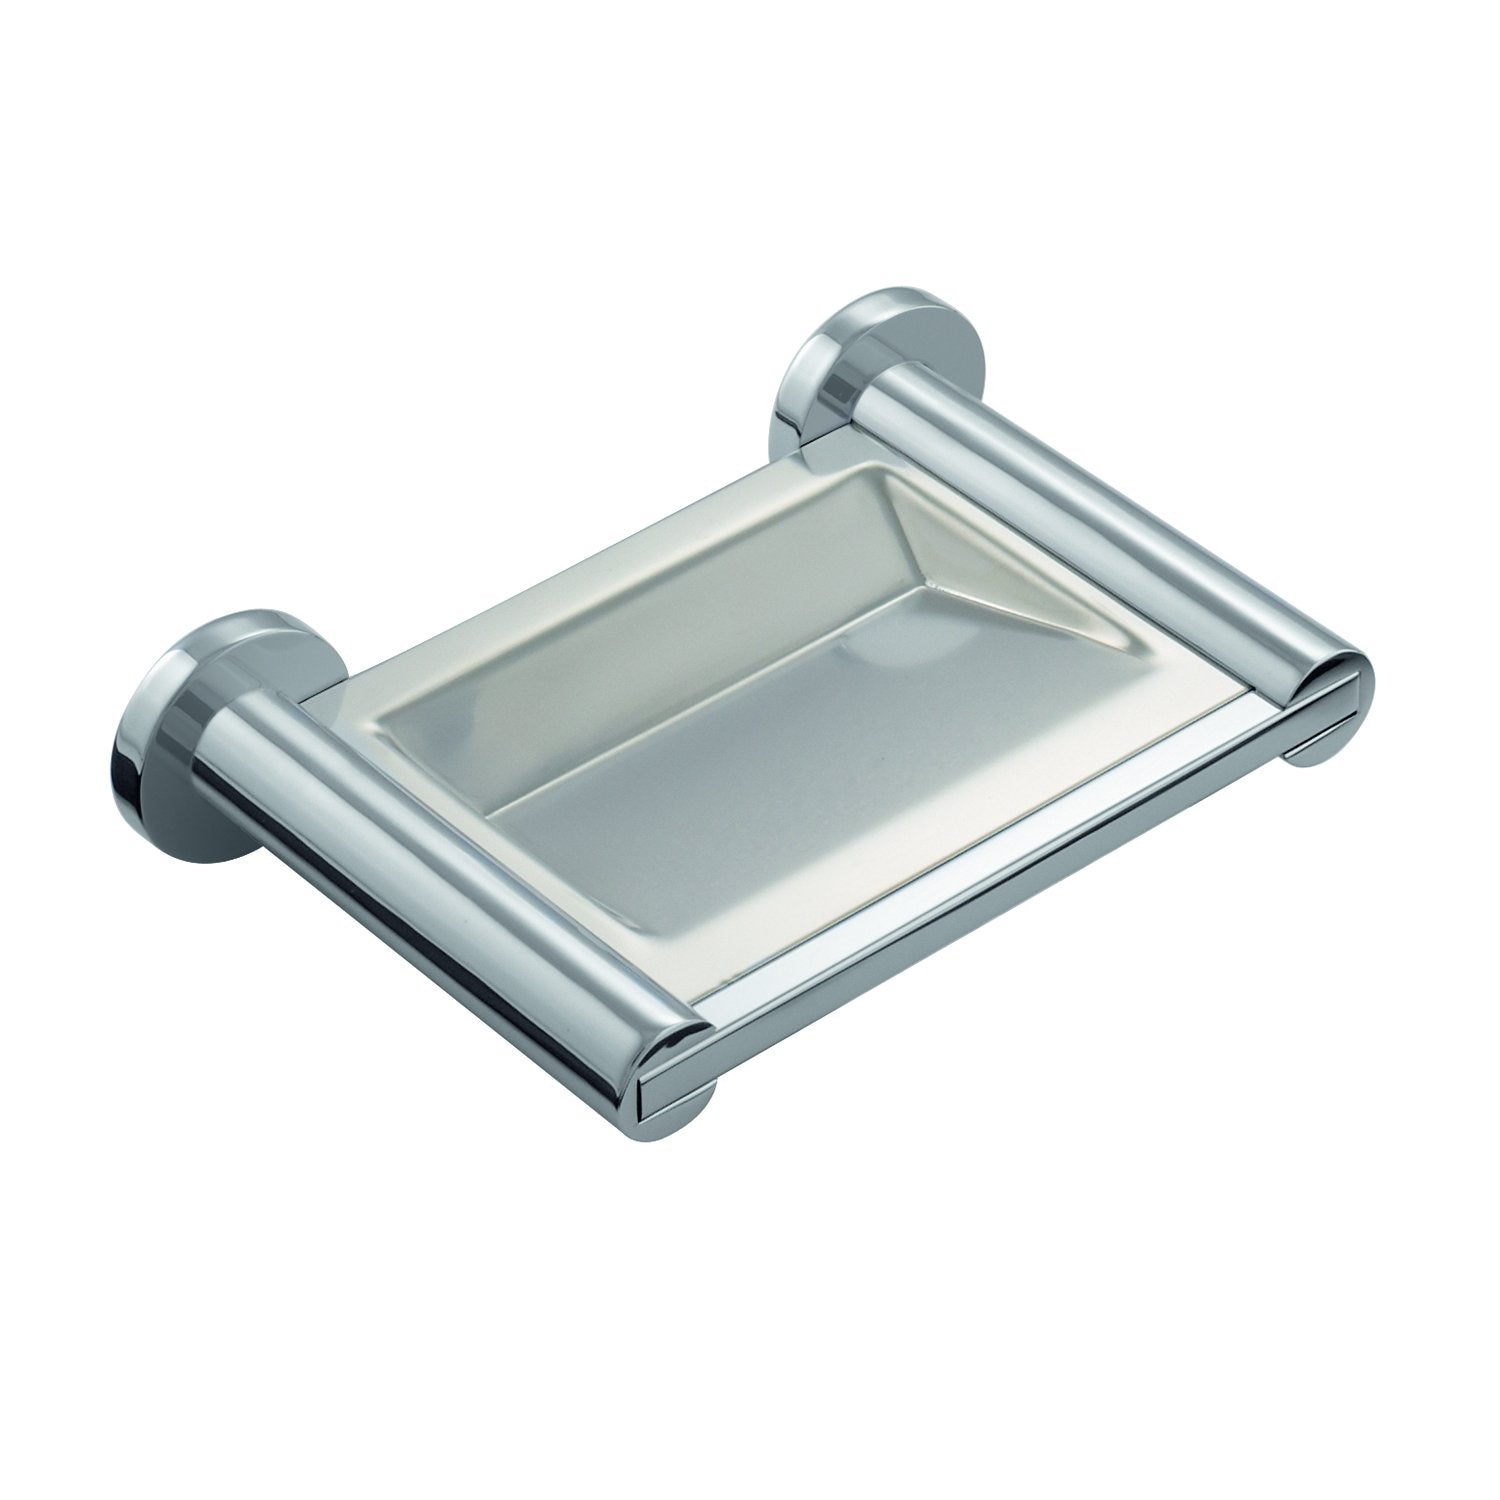 COSMIC Architect Soap Dish, Wall Mount, Stainless Steel, Chrome Finish, 6-11/16 x 1-9/16 x 4-5/16 Inches (2050132)